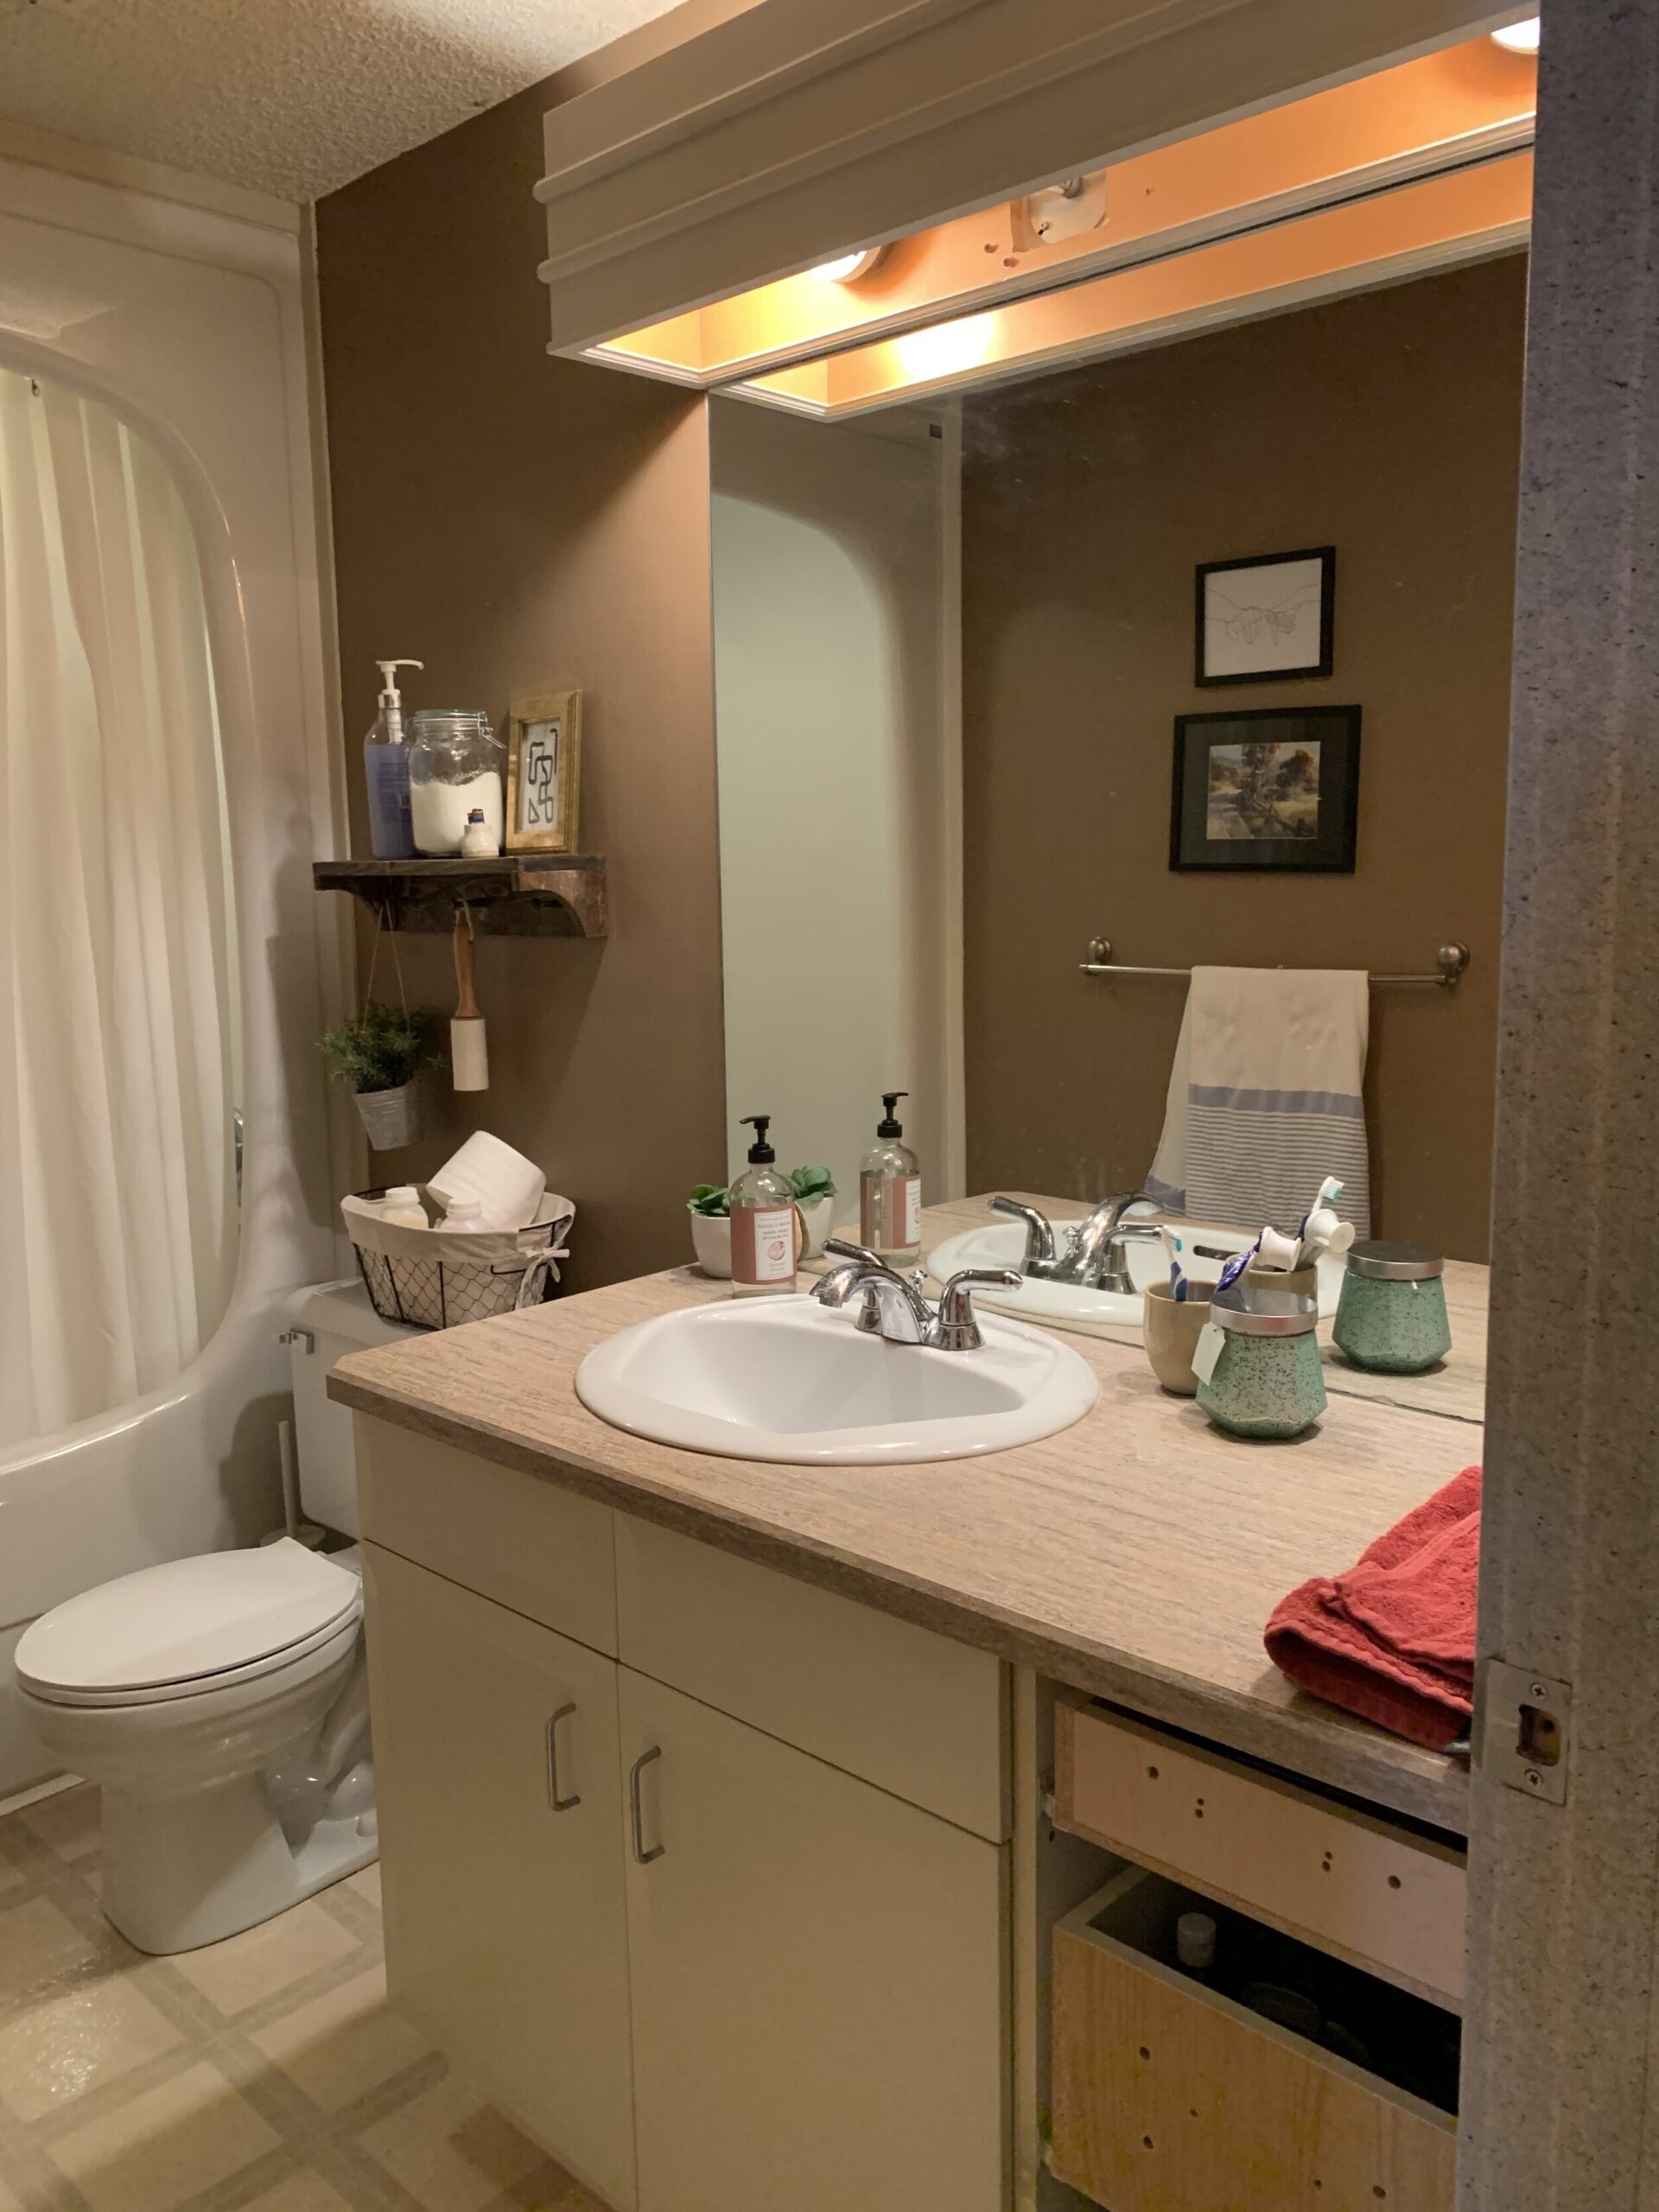 brown bathroom with vantiy with white doors and drawers missing, laminate counters, brown walls